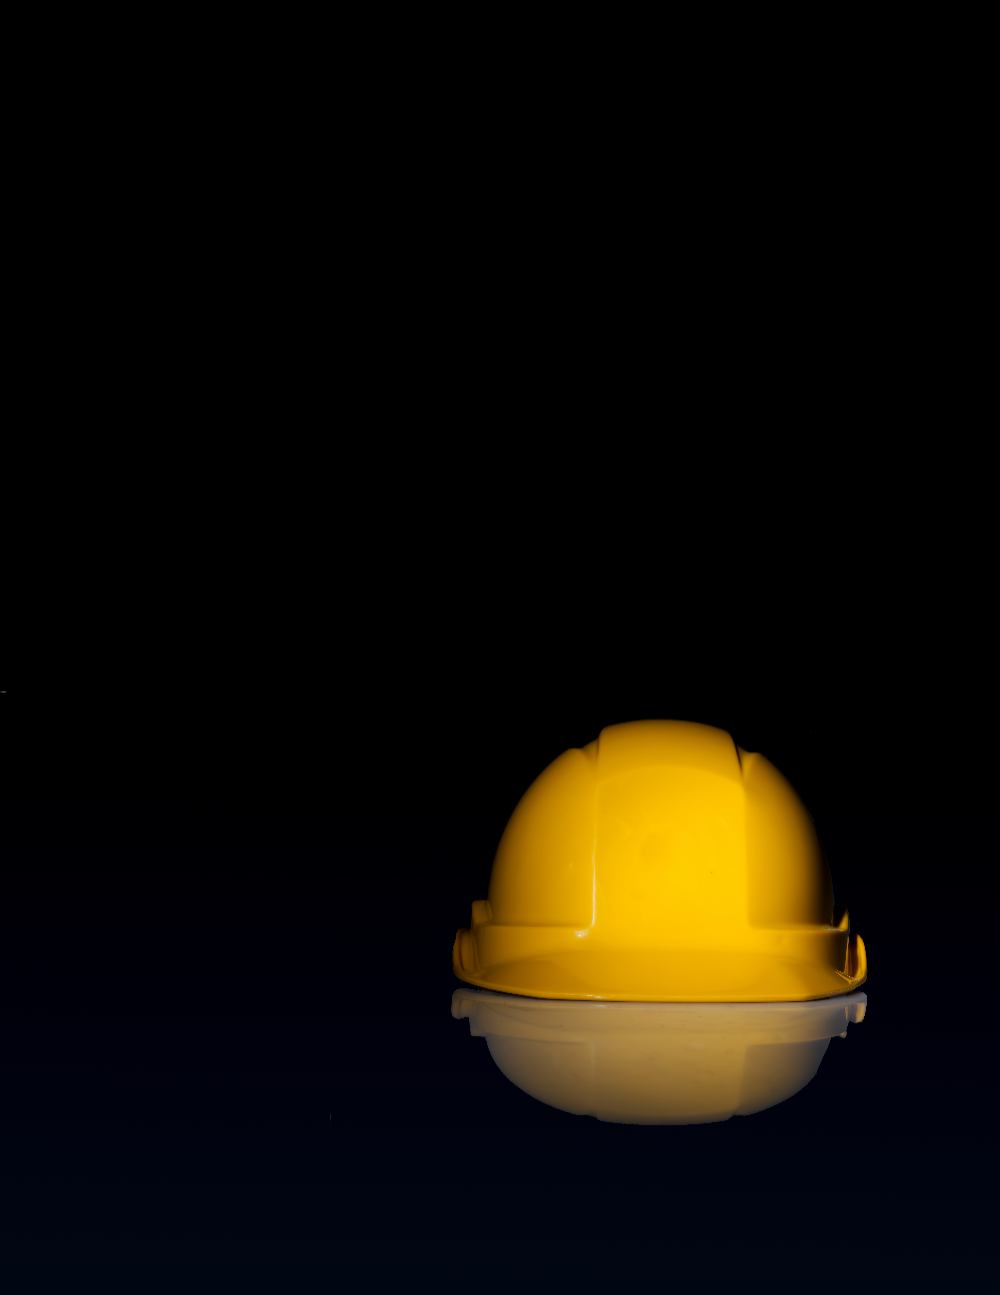 A hard hat placed on a dark, shiny surface